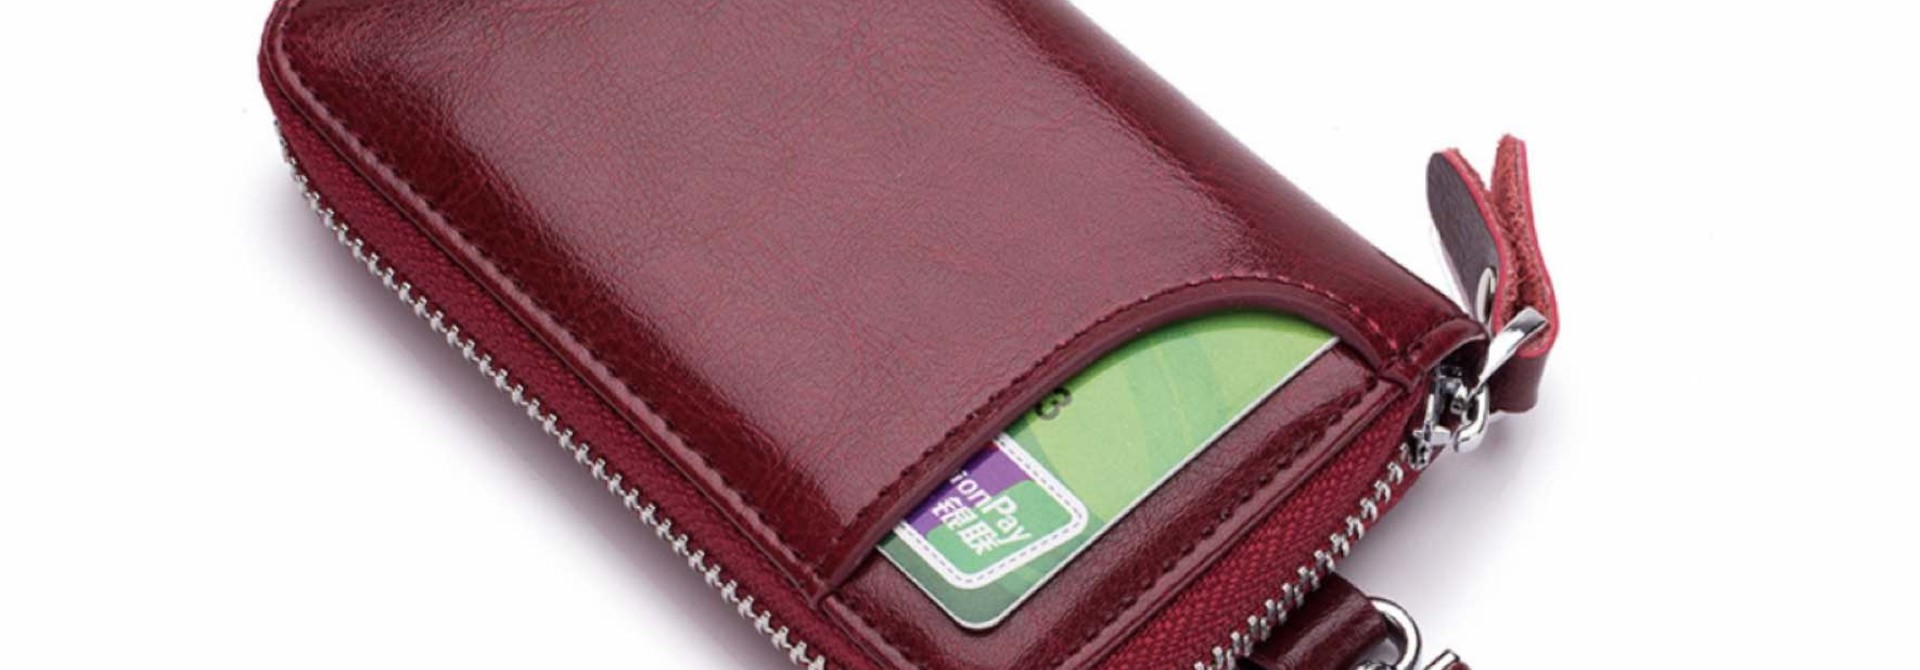 Genuine Leather Key Case Card Holder - 6 Hooks, 2 Long Car Key Chain - 1 Outer, 2 Inner Card Banknotes Slots - Wine Red